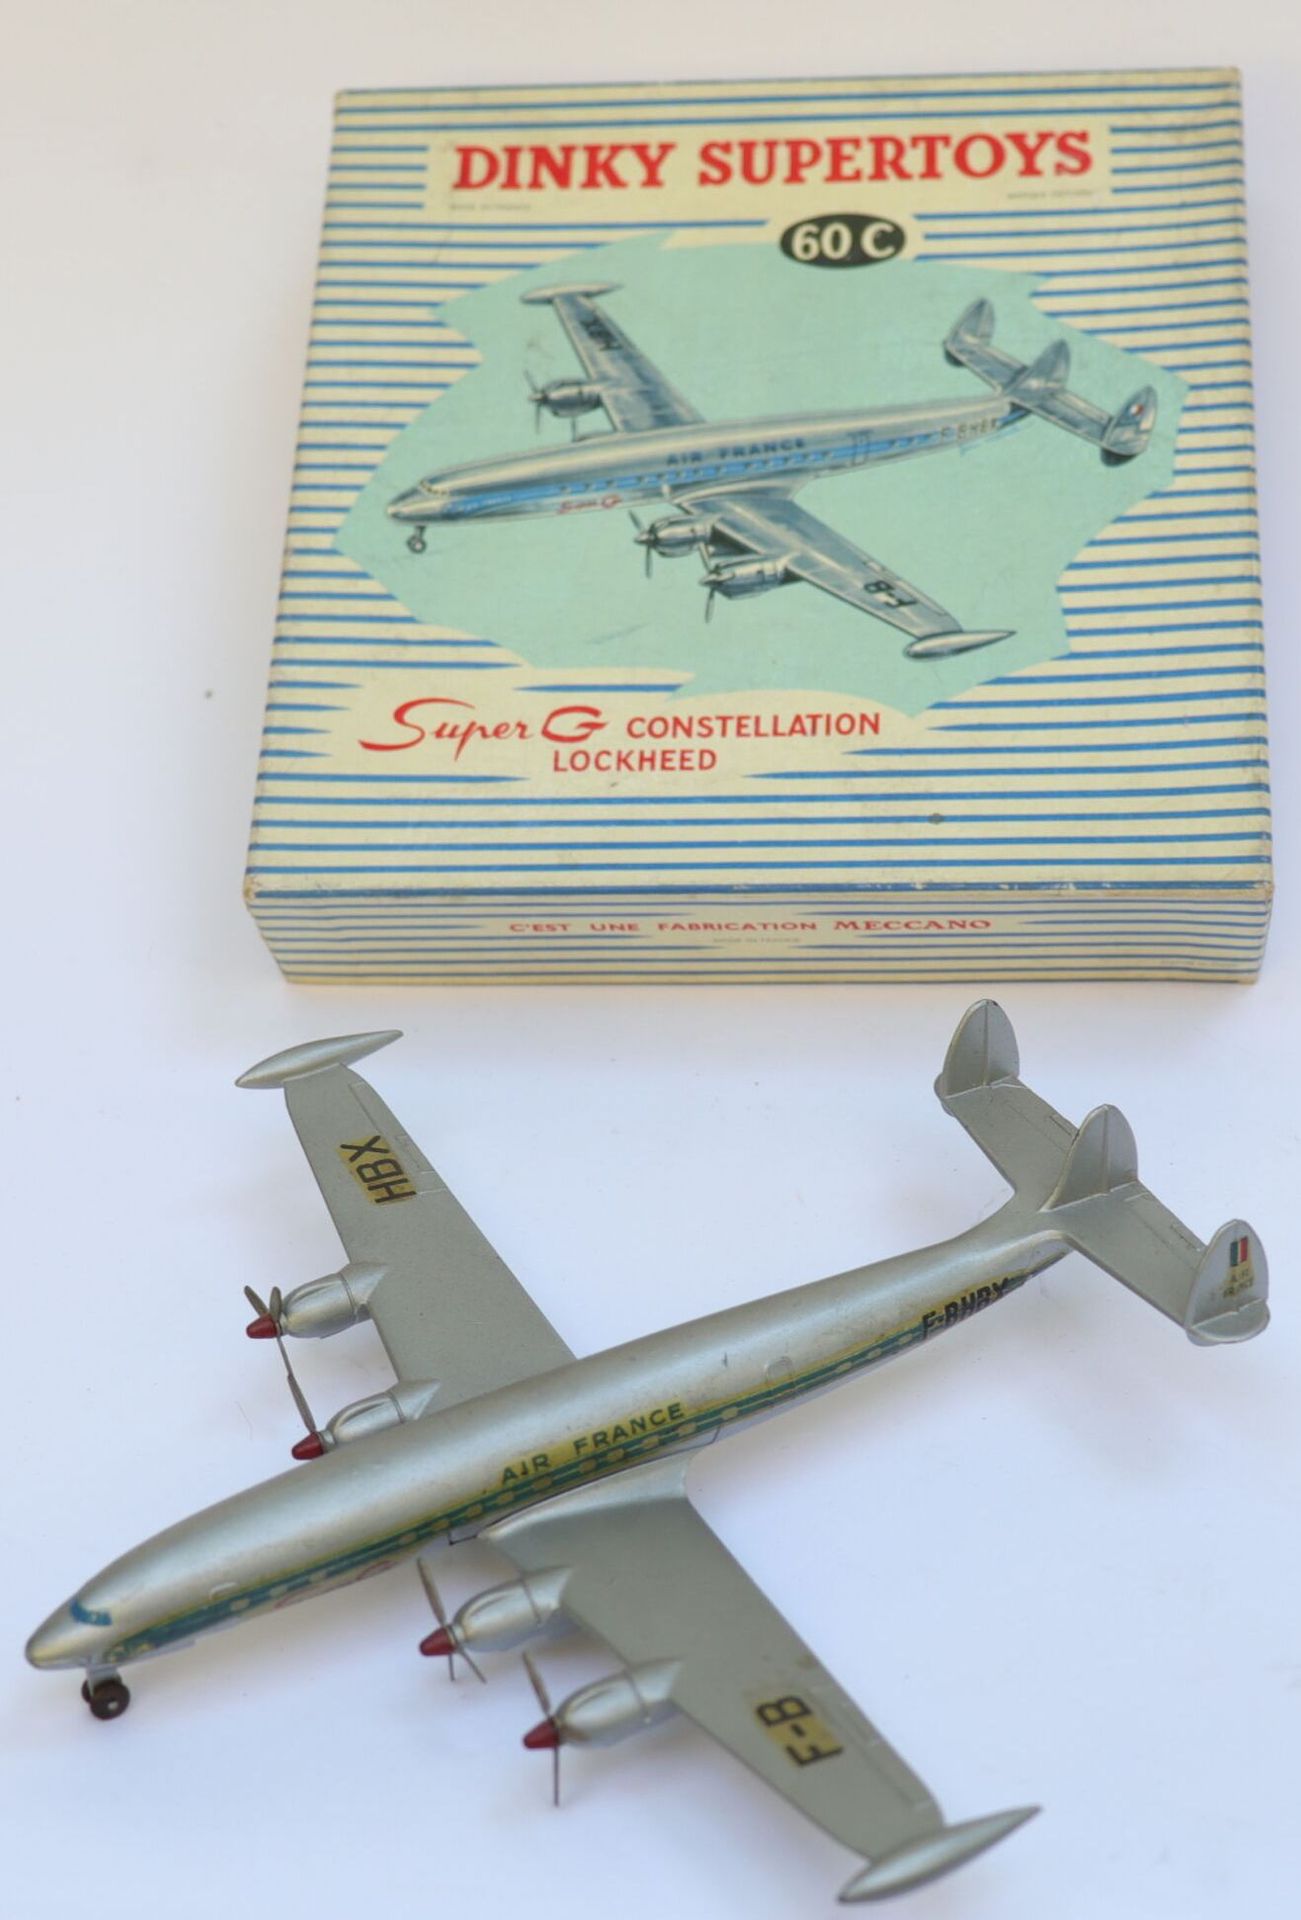 Null LOCKHEED SUPER G CONSTELLATION AIR FRANCE.

Dinky Supertoys.

Modello in me&hellip;